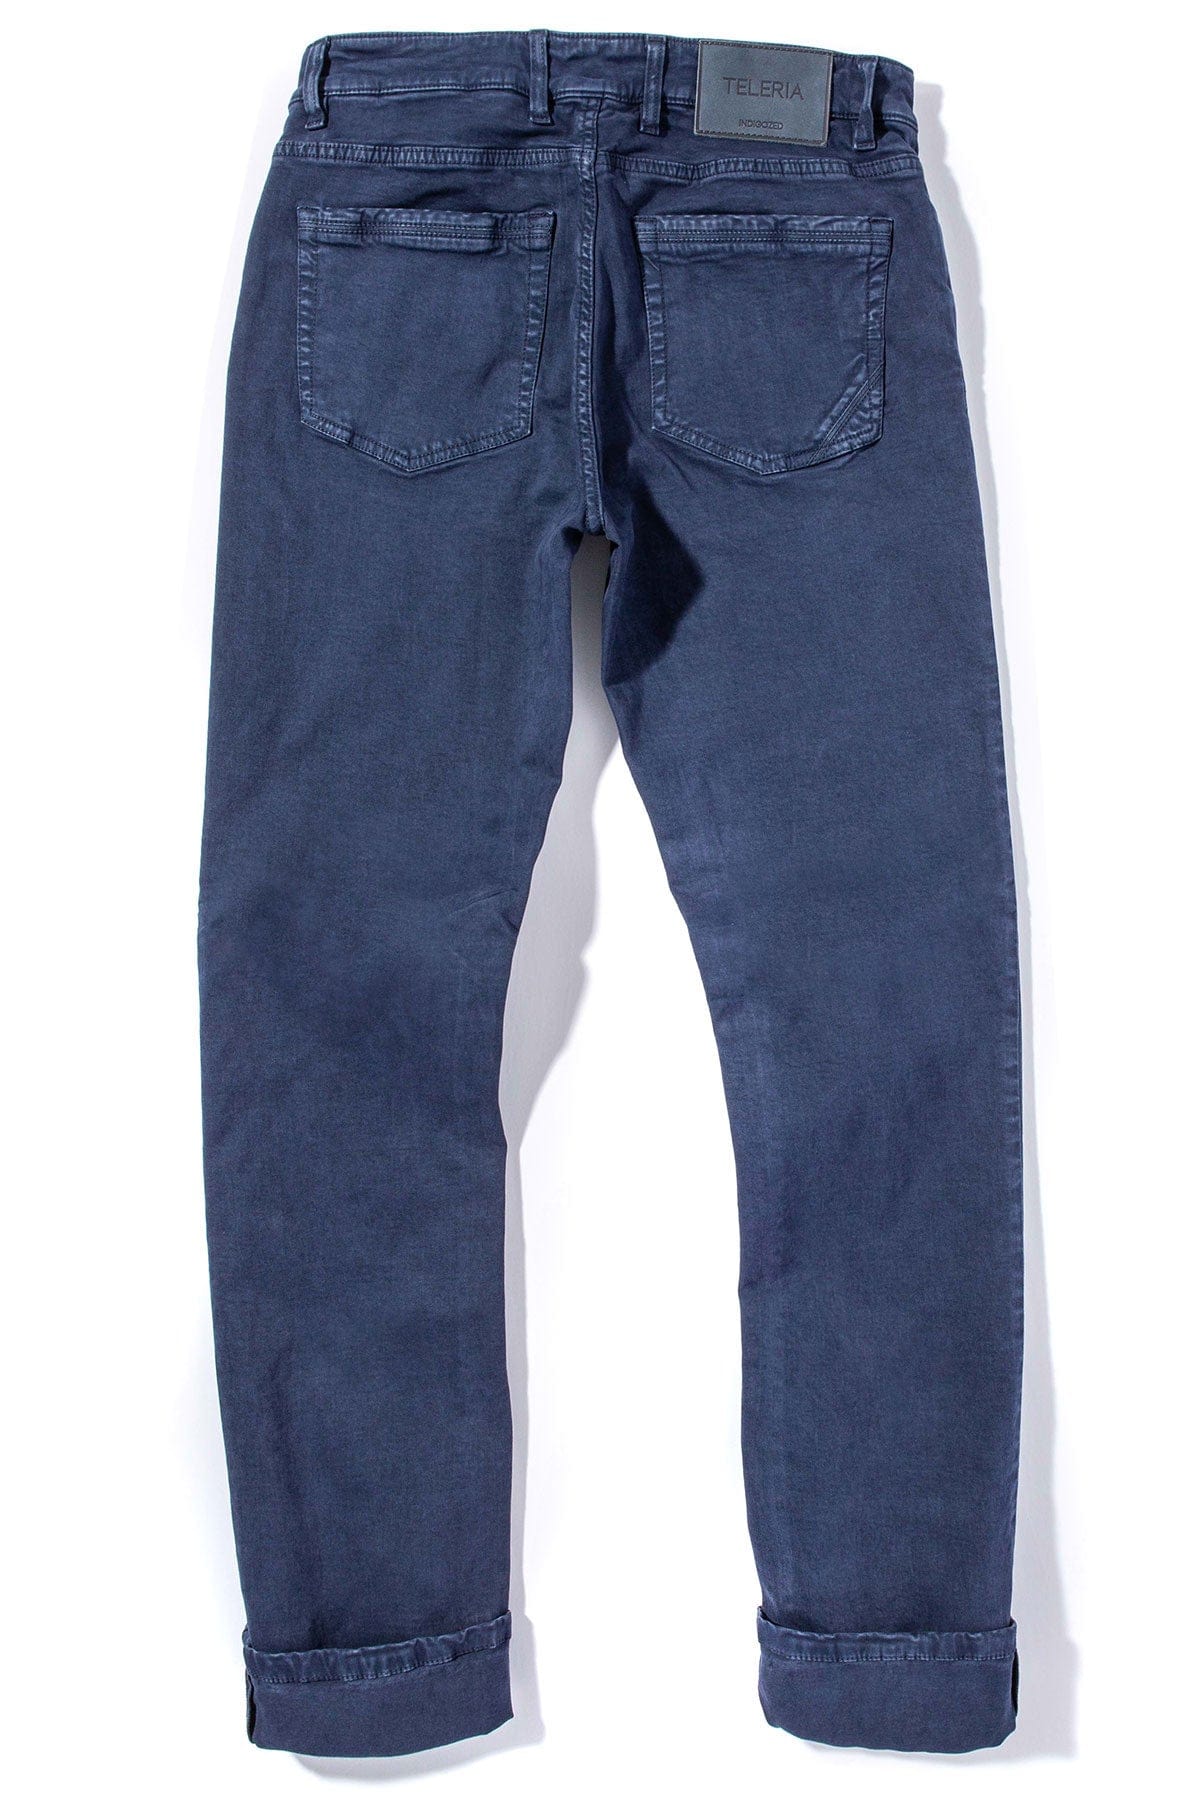 Ryland Rugged Soft Touch Cotton Jeans in Indaco - AXEL'S